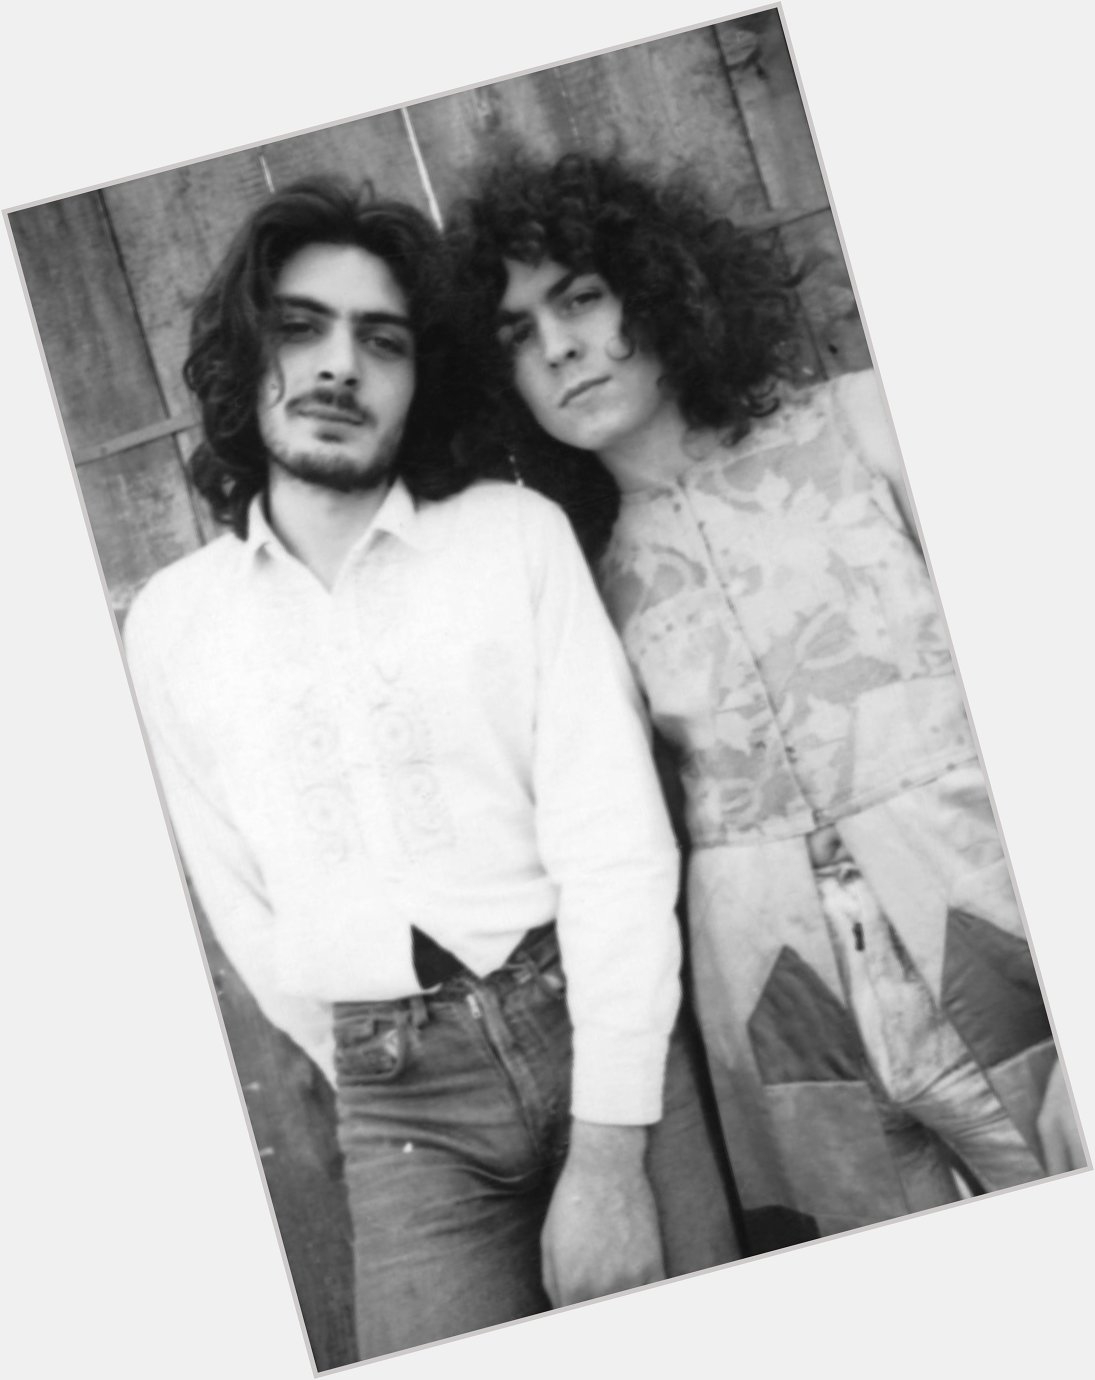 Happy Birthday to the late Mickey Finn of T.Rex.  